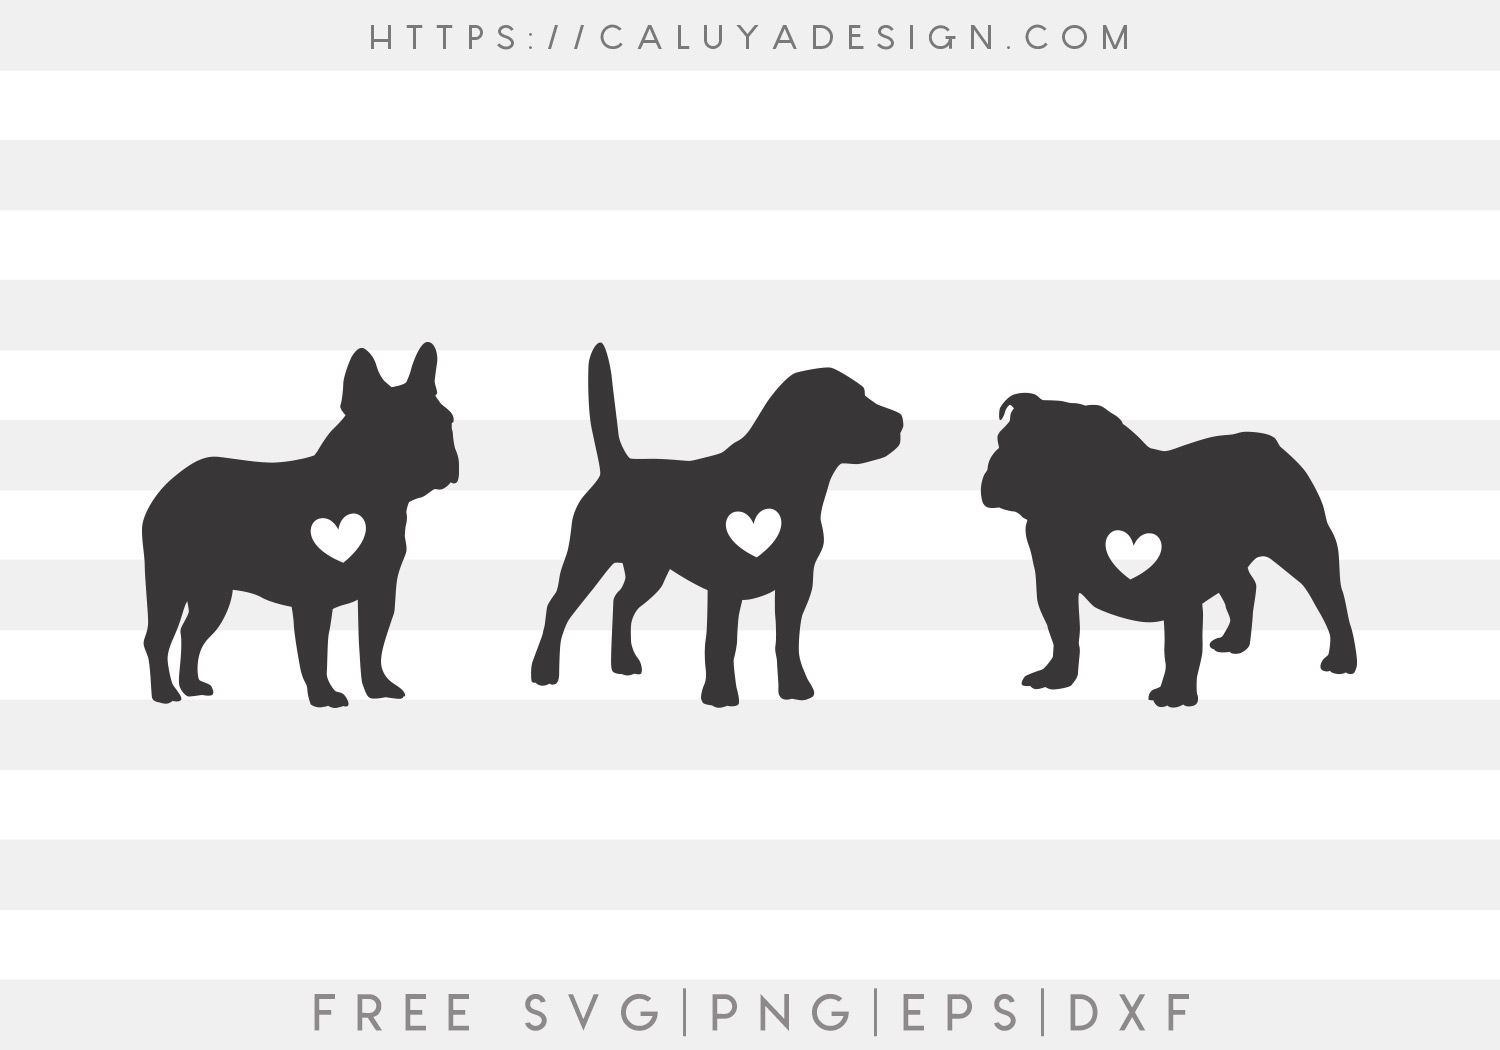 Free Small Dog Silhouette with Heart SVG Cut File